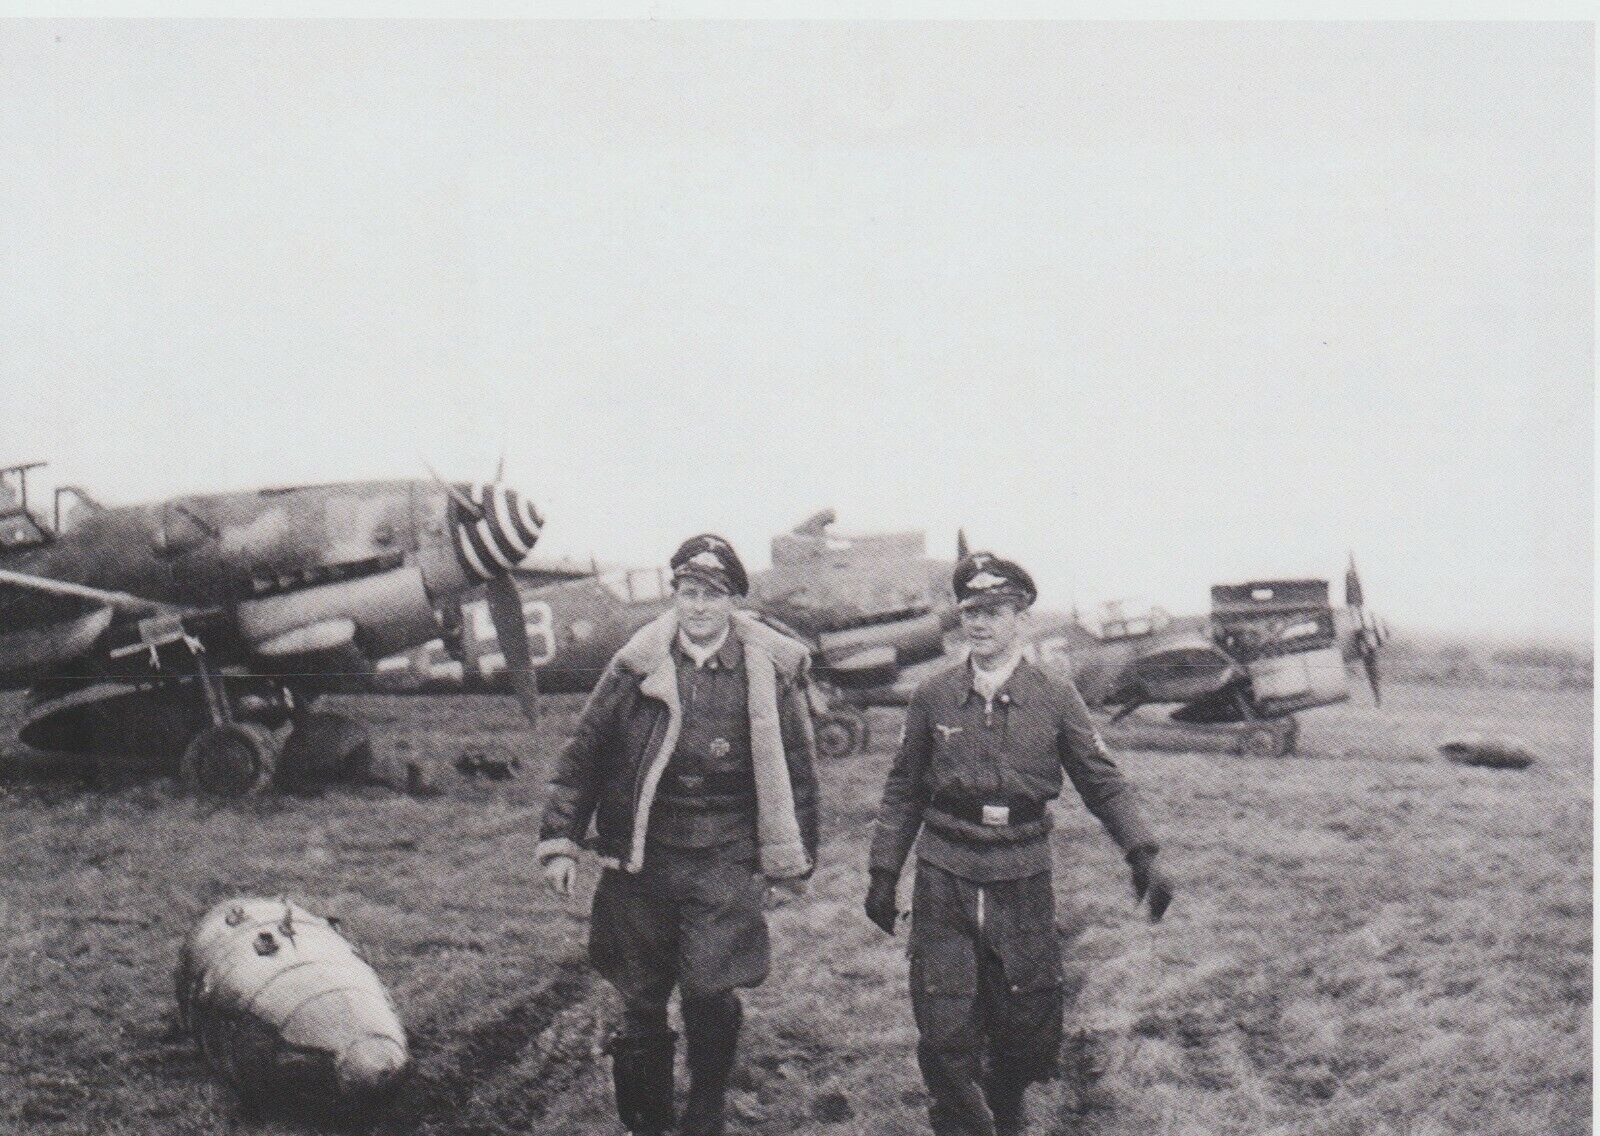 OFw Muller and Fw Blume of Luftwaffe 4/JG27 with their BF109G-6s WW2 4x6